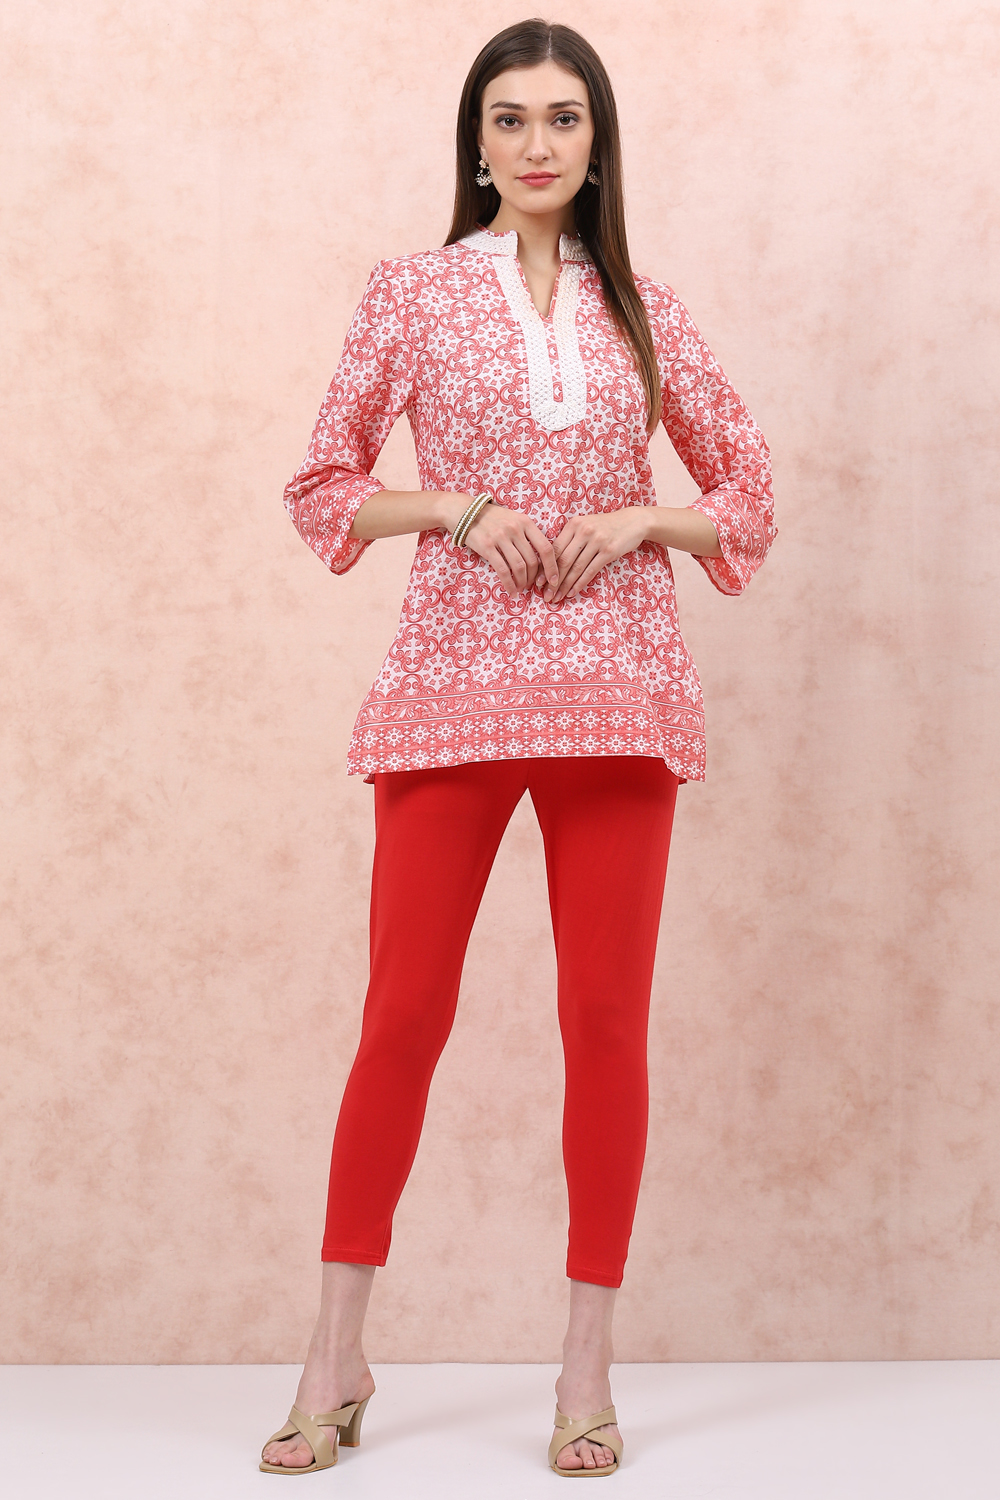 Red Cotton Leggings image number 1